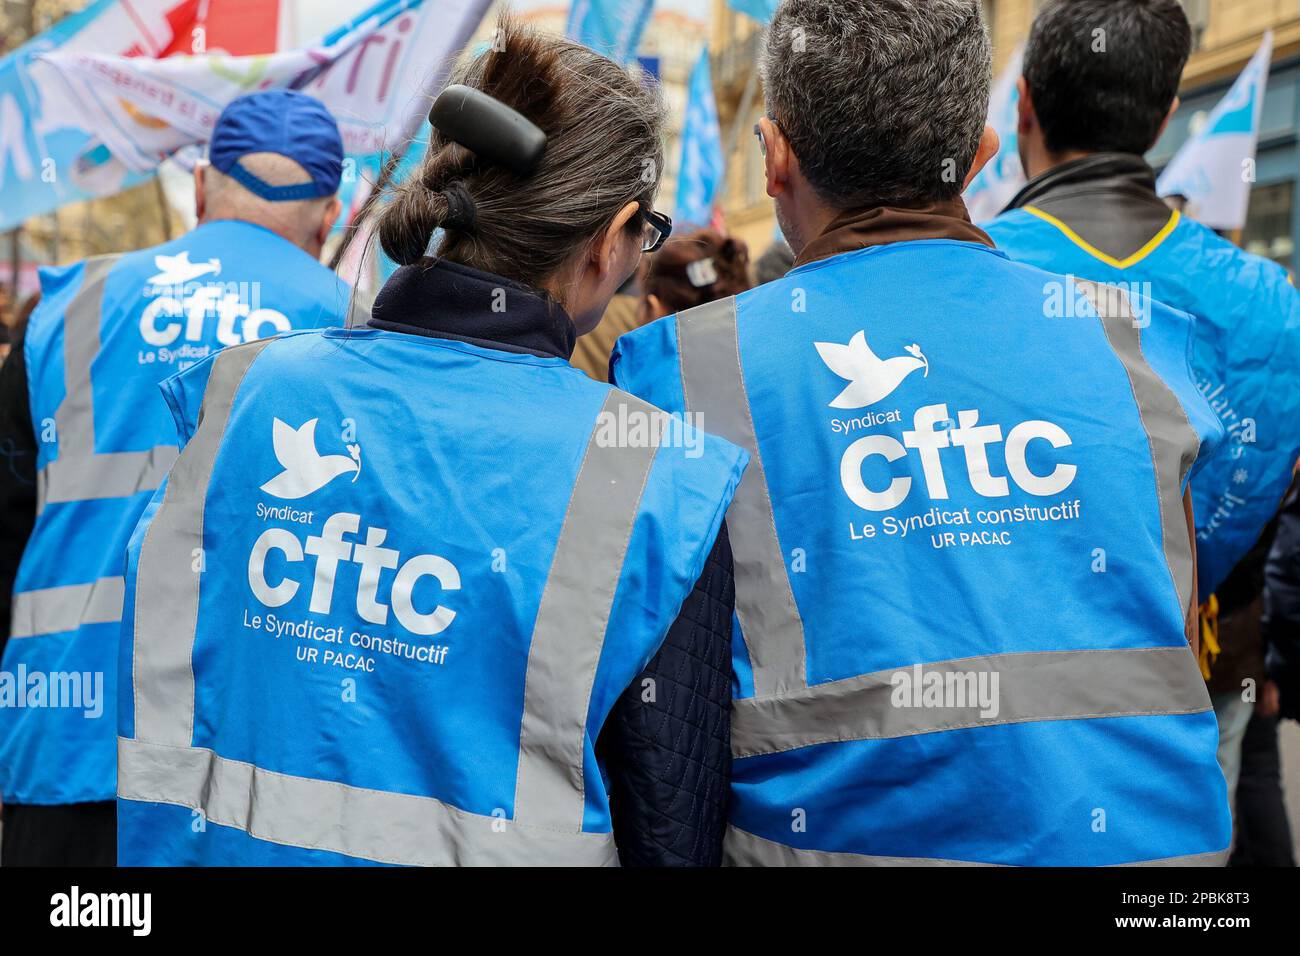 Demonstrators from the CFTC (French Confederation of Christian Workers) union wear vests tagged CFTC during the demonstration. French unions have called for a seventh day of action against the French government's pension reform that would raise the retirement age from 62 to 64. The police estimate, for this 7th day, the number of demonstrators marching in the streets of Marseilles at 7,000 while the unions estimate it at 80,000. The Ministry of the Interior reports 368,000 demonstrators in the streets of France, while the unions claim more than 1 million (Photo by Denis Thaust/SOPA Images/Si Stock Photo